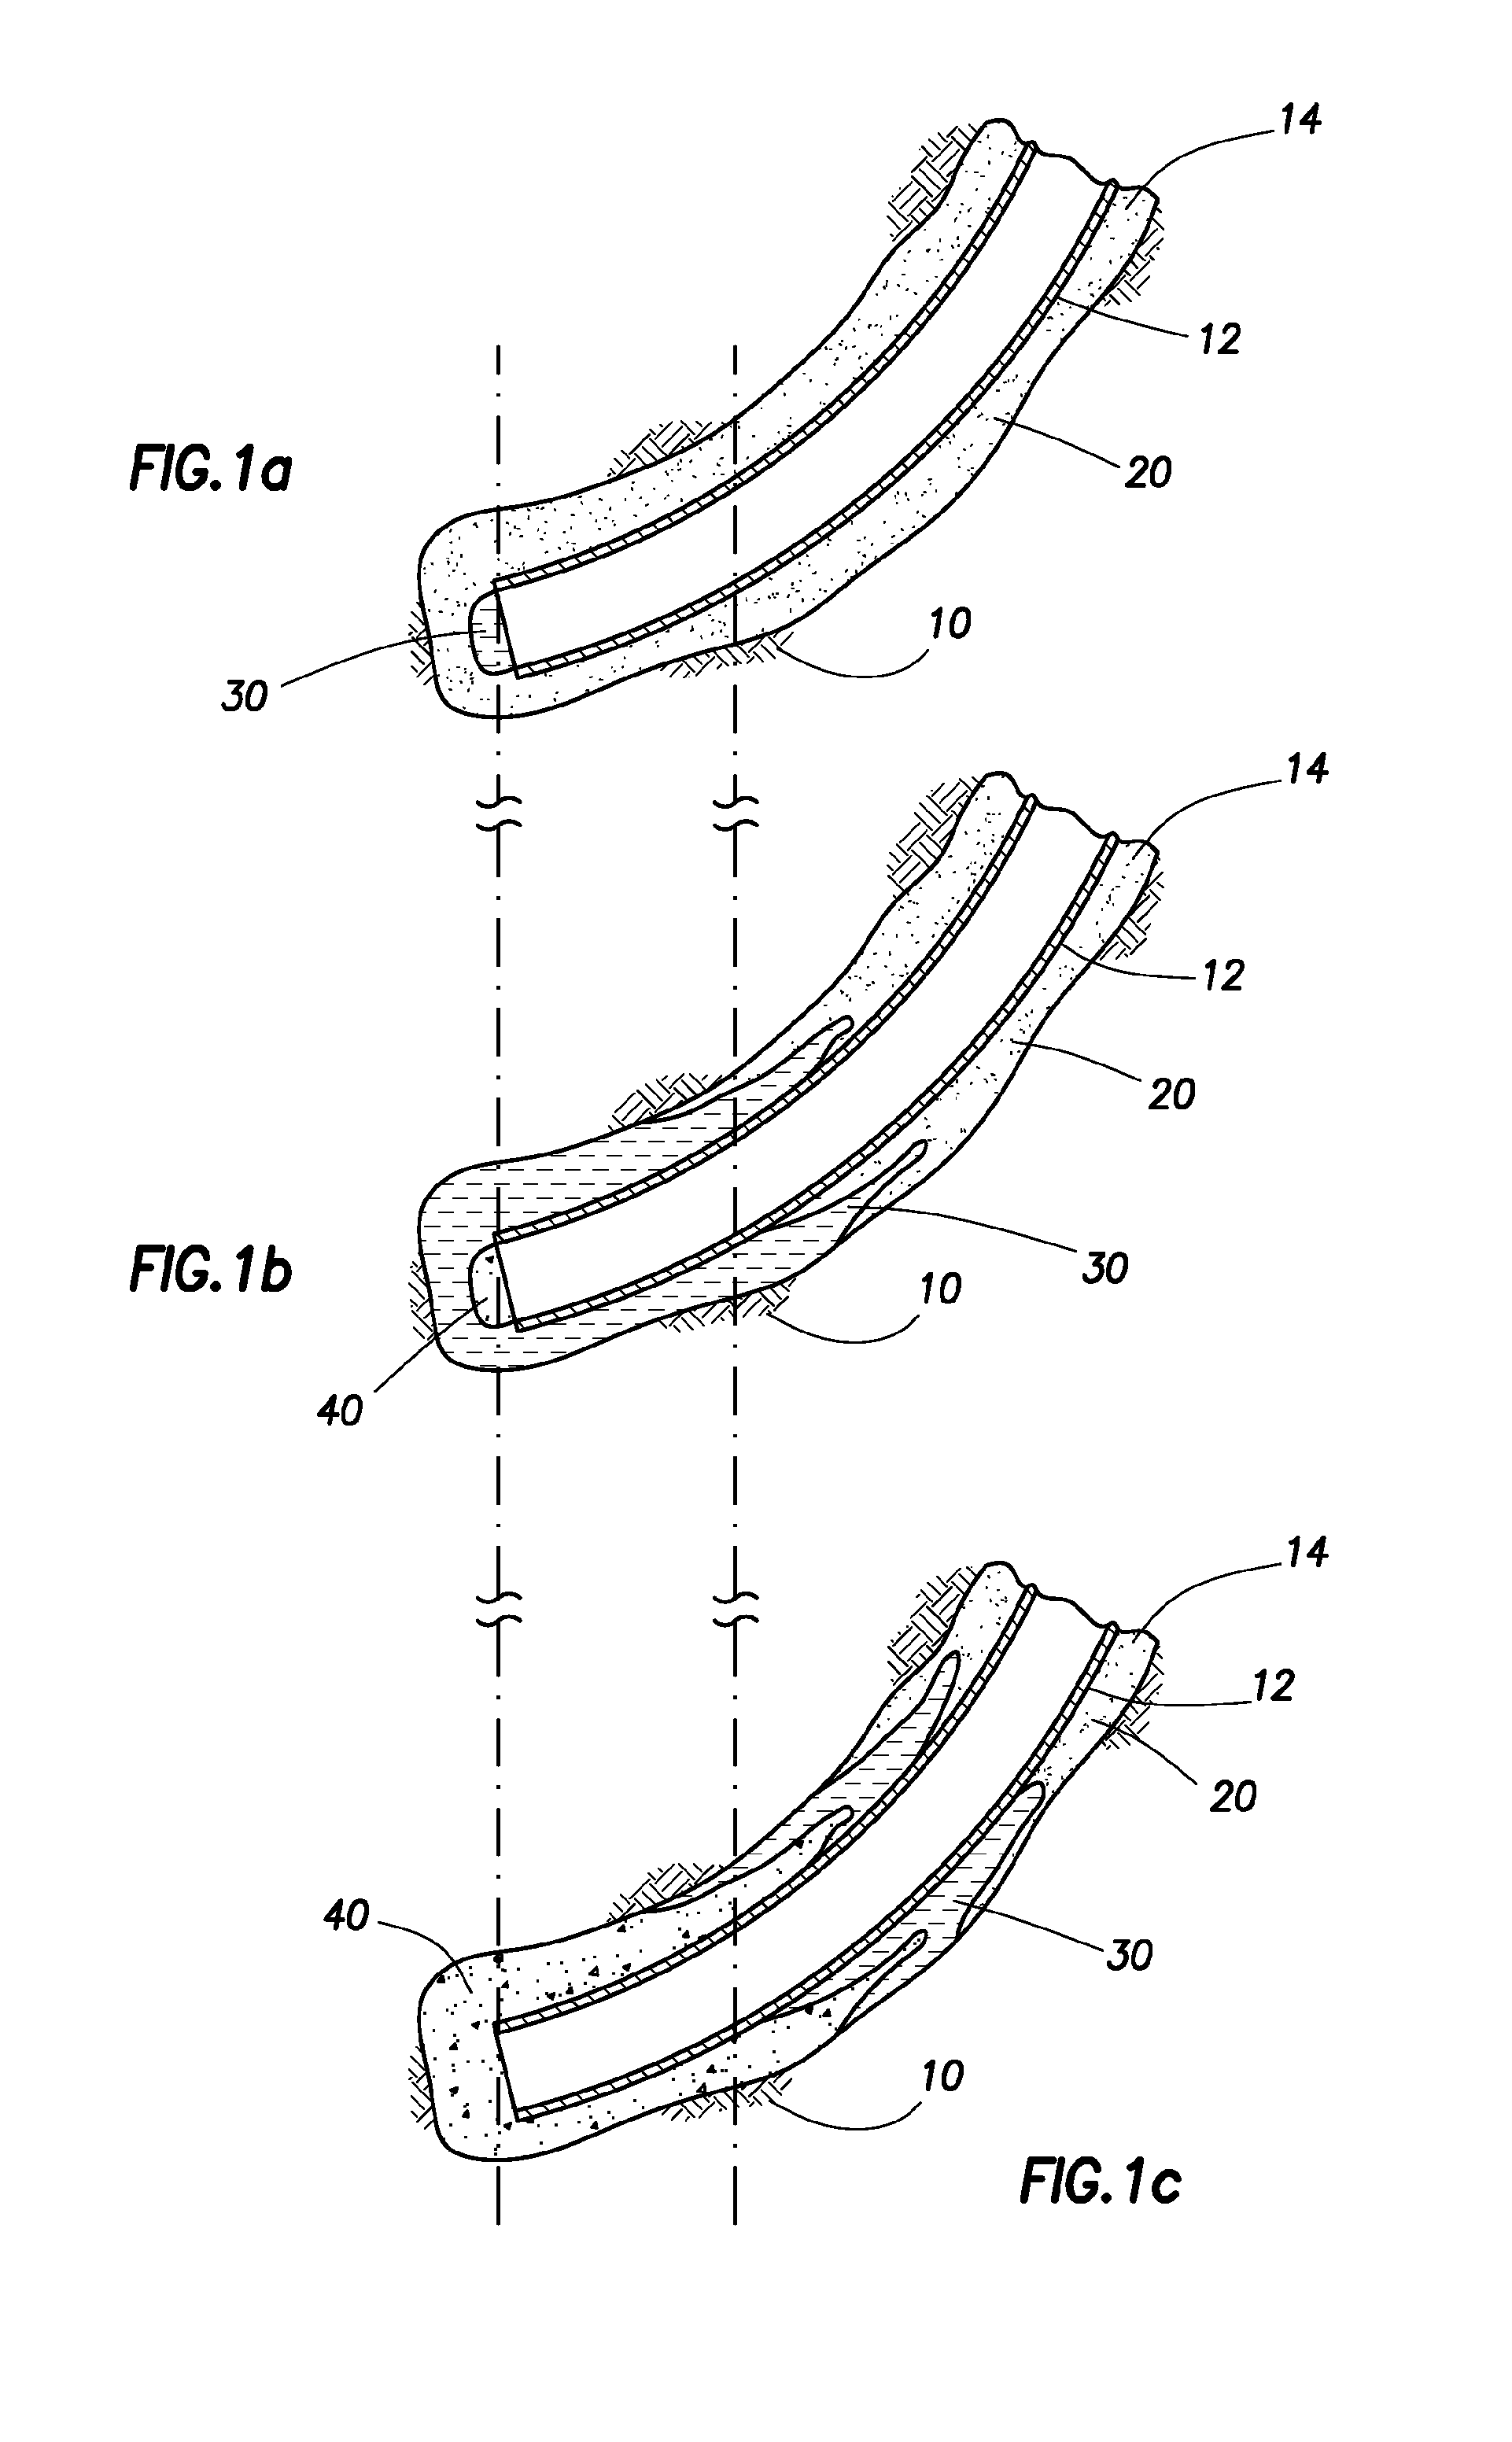 Apparatus and methods for determining surface wetting of material under subterranean wellbore conditions